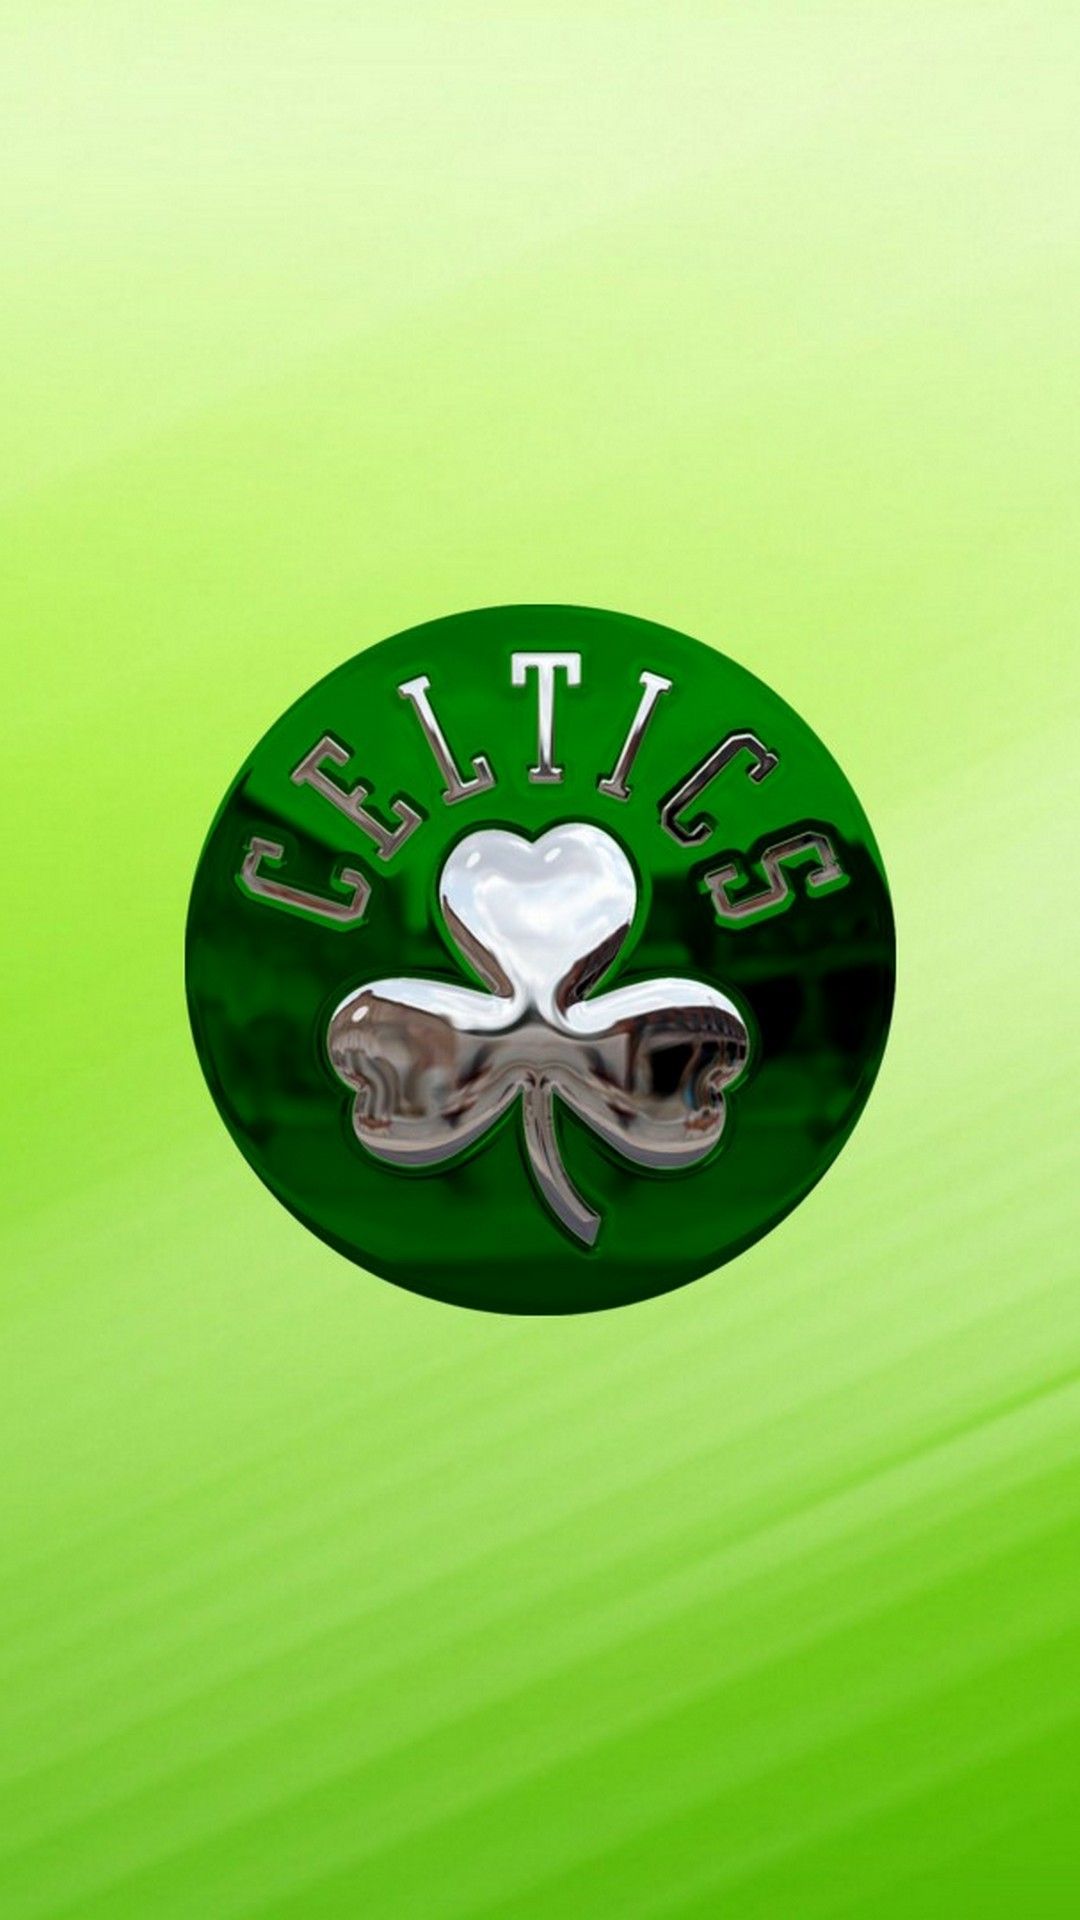 Boston Celtics HD Wallpaper For Android Android Wallpaper